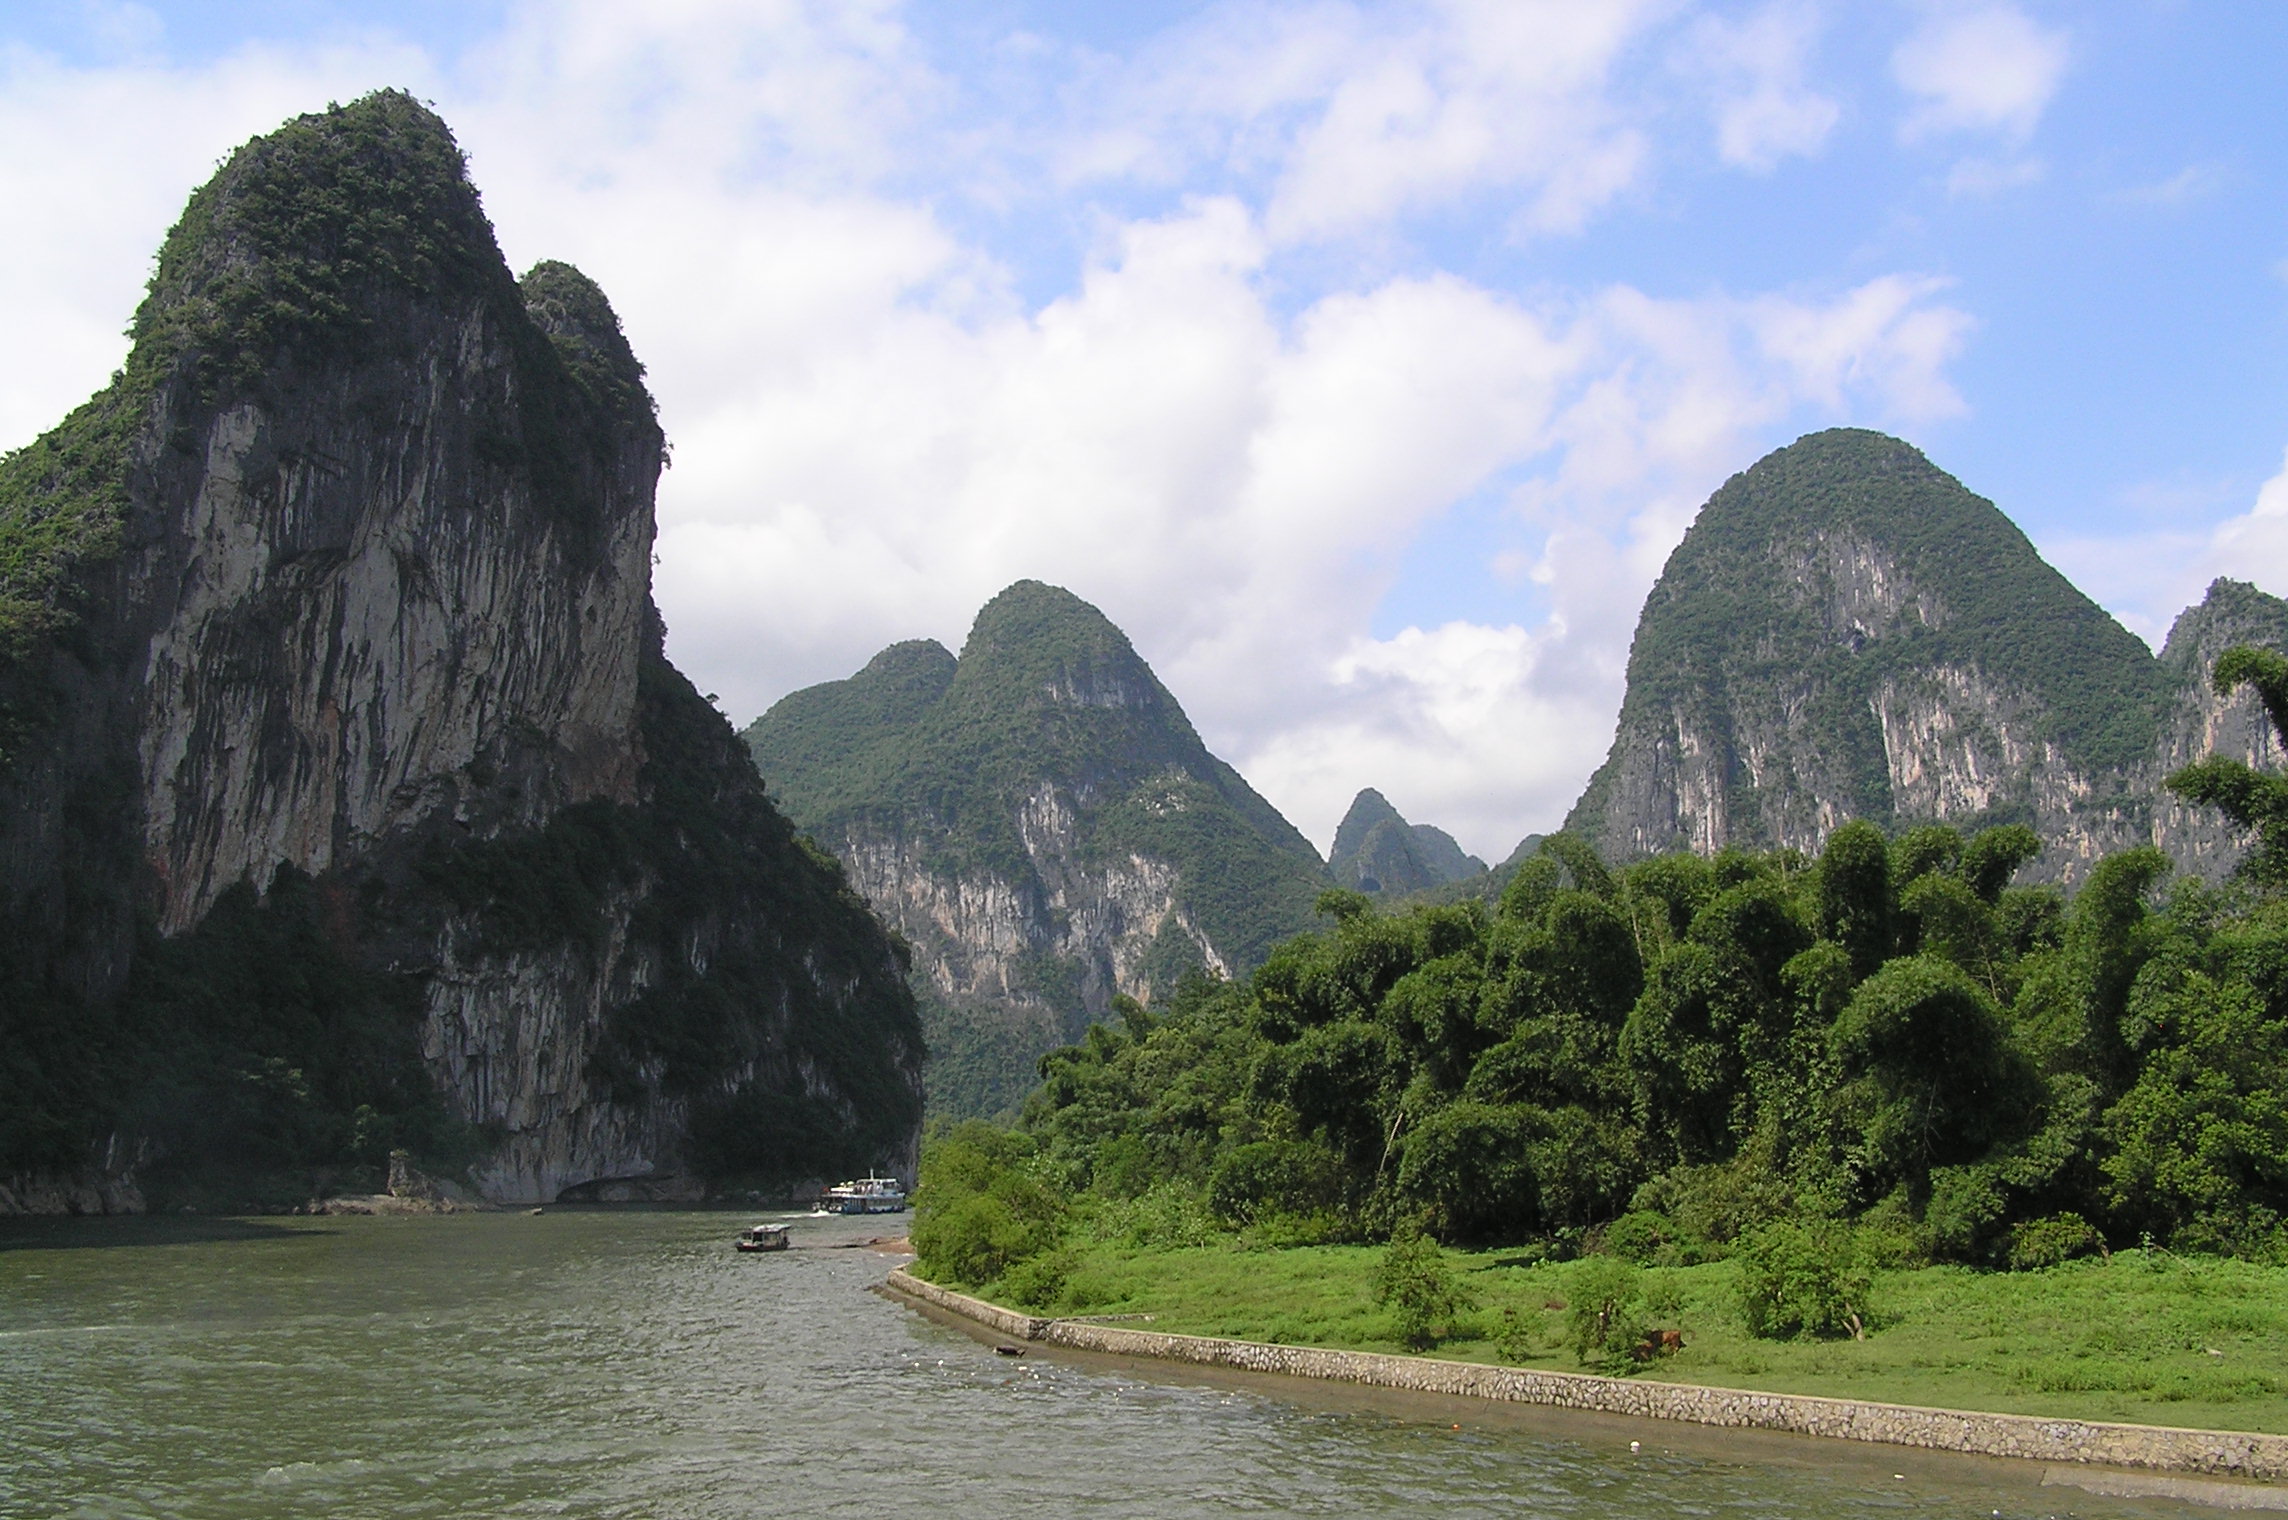 Picture of the Li river going through big mountains full of vegetation. A couple of small boats can be seen on the river.